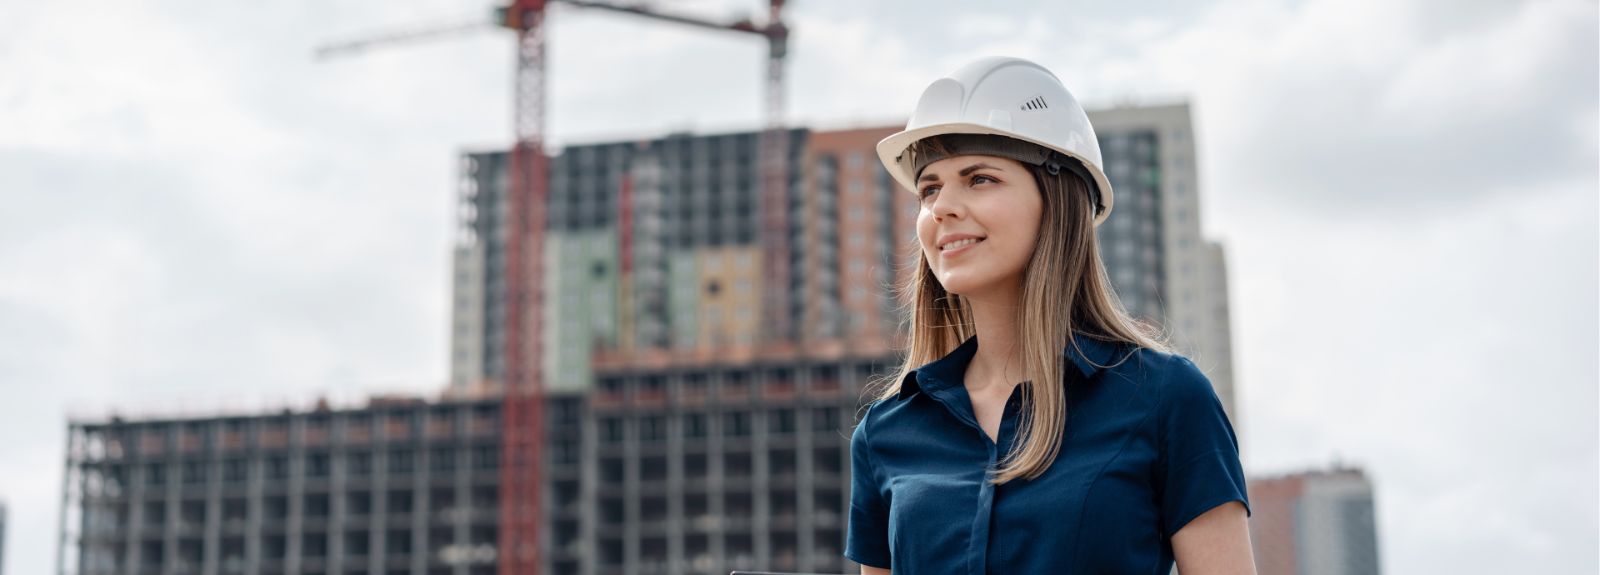 female student standing on a building roof wearing a hard hat